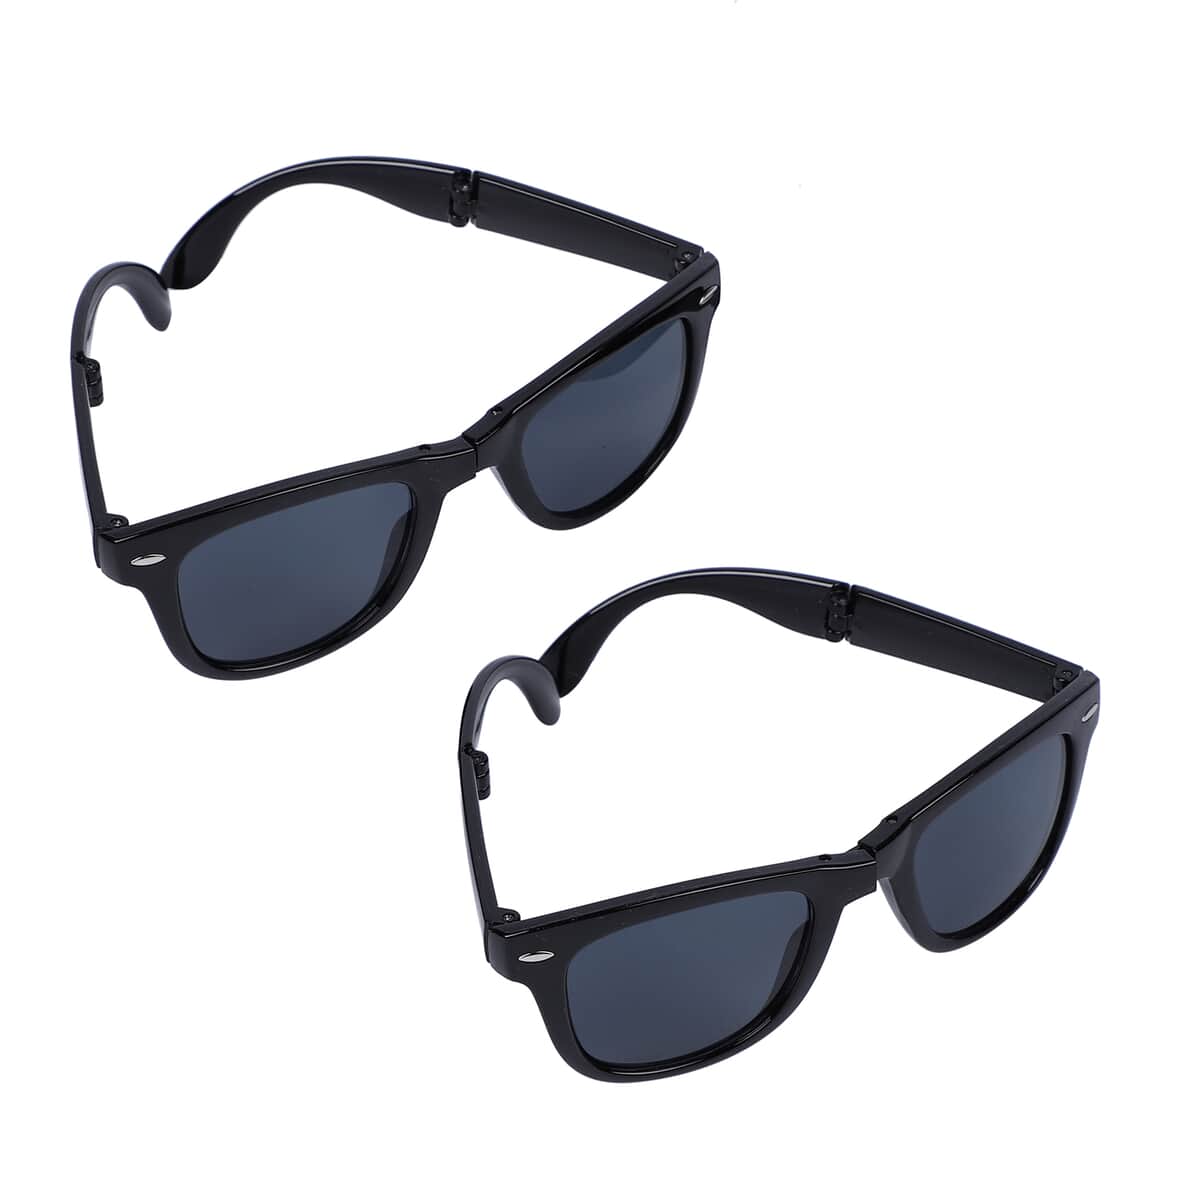 Set of 2 Foldable Sunglasses with Carry Pouch-Black image number 1